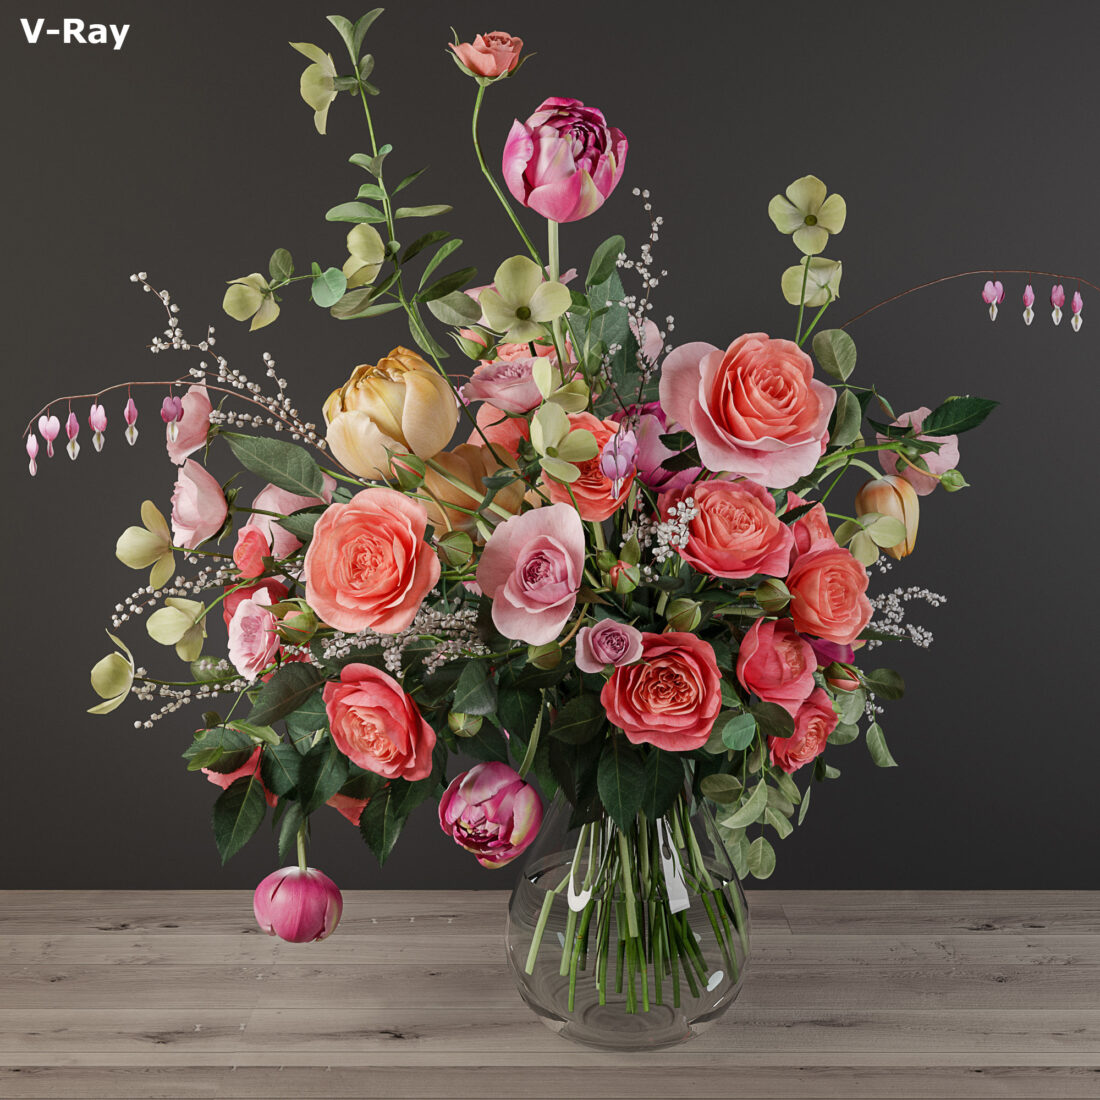 3d-Bouquet-of-roses-Model-413-Download-2-scaled-1